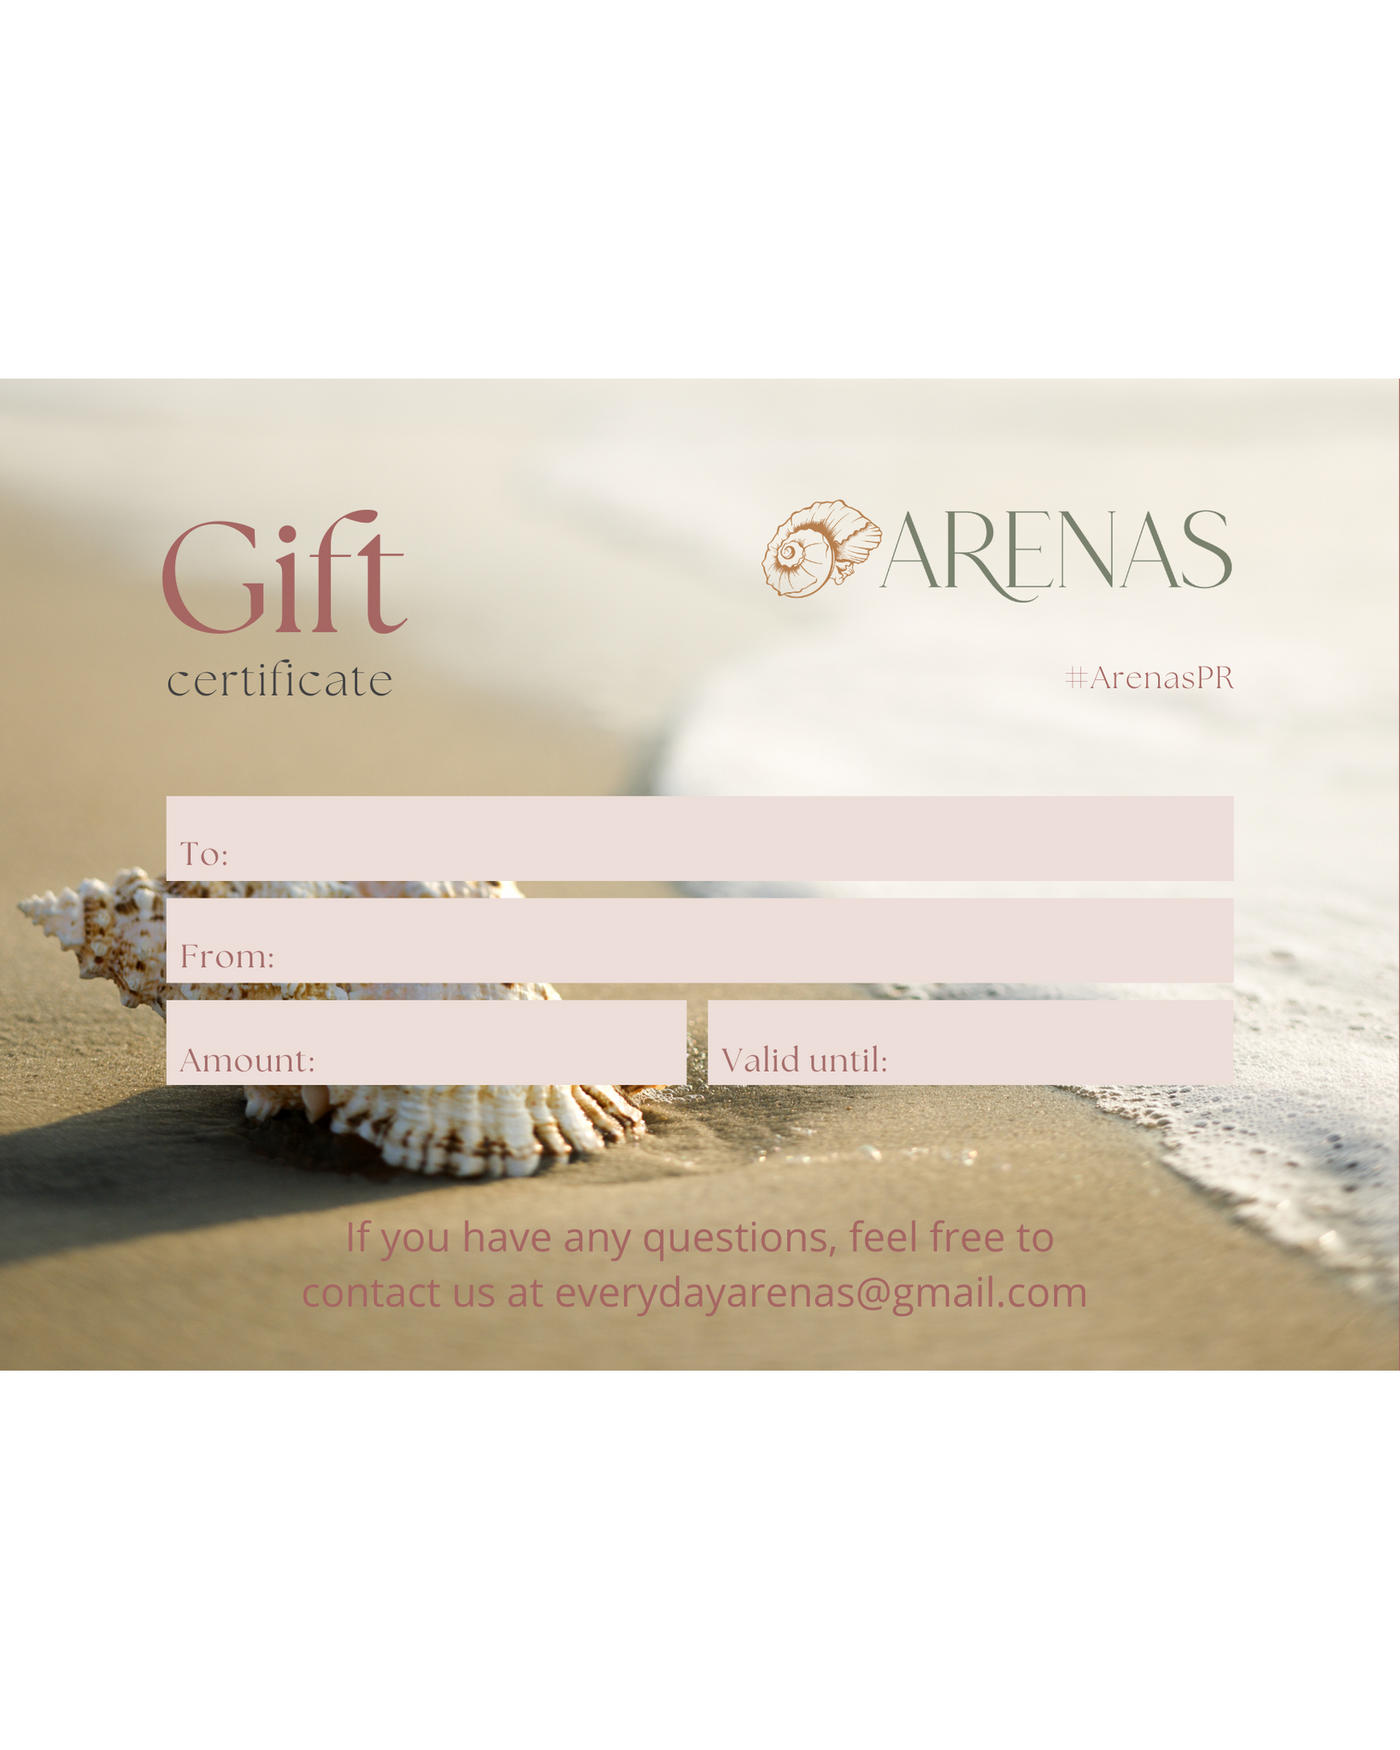 Gift Certificate Option 1